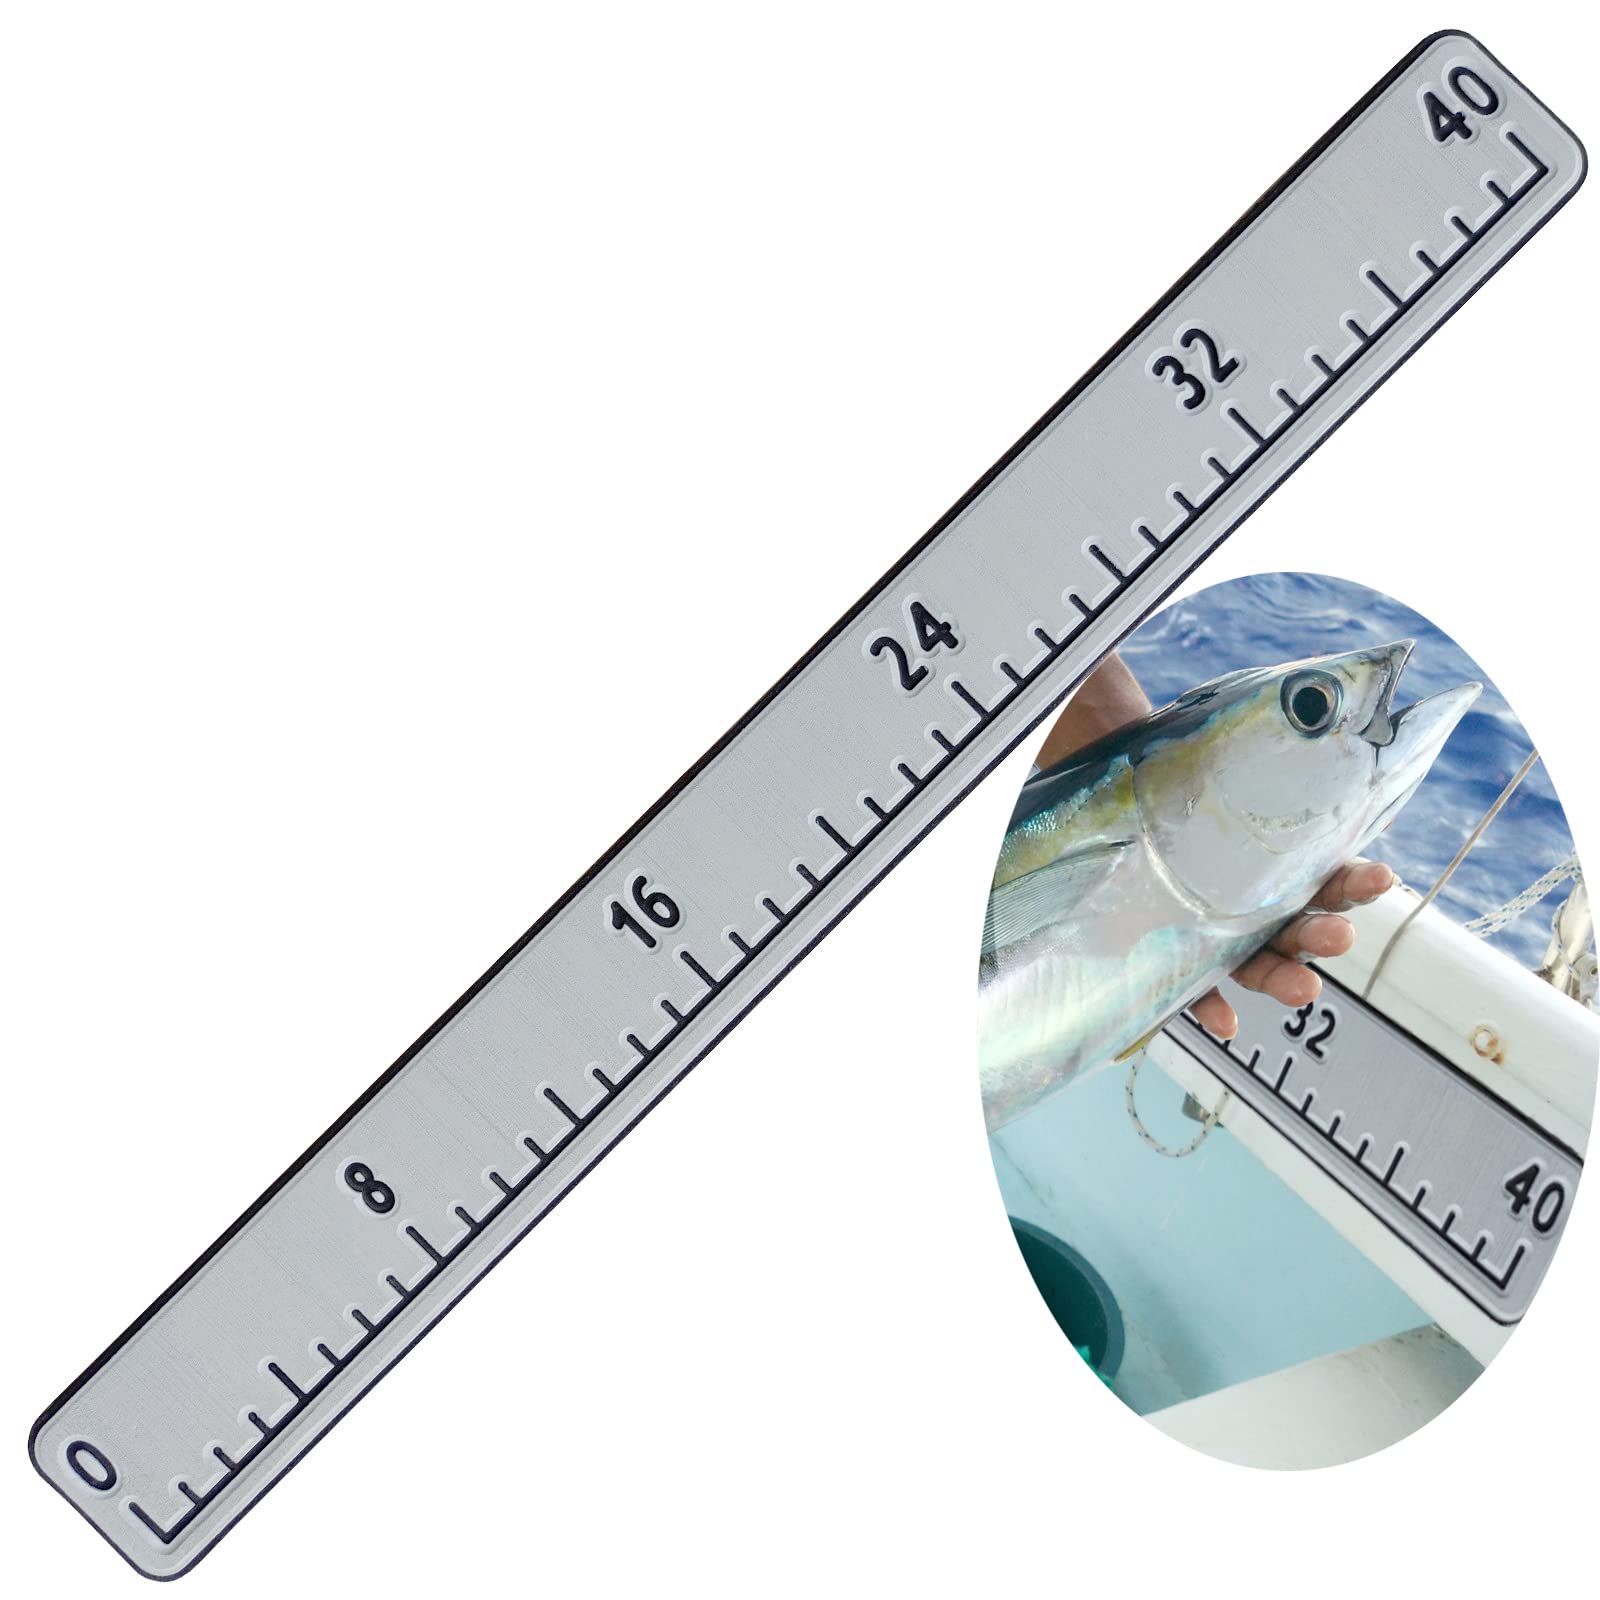 Portable Fishing Ruler Scale Fish Measurement Accurate Soft Tape